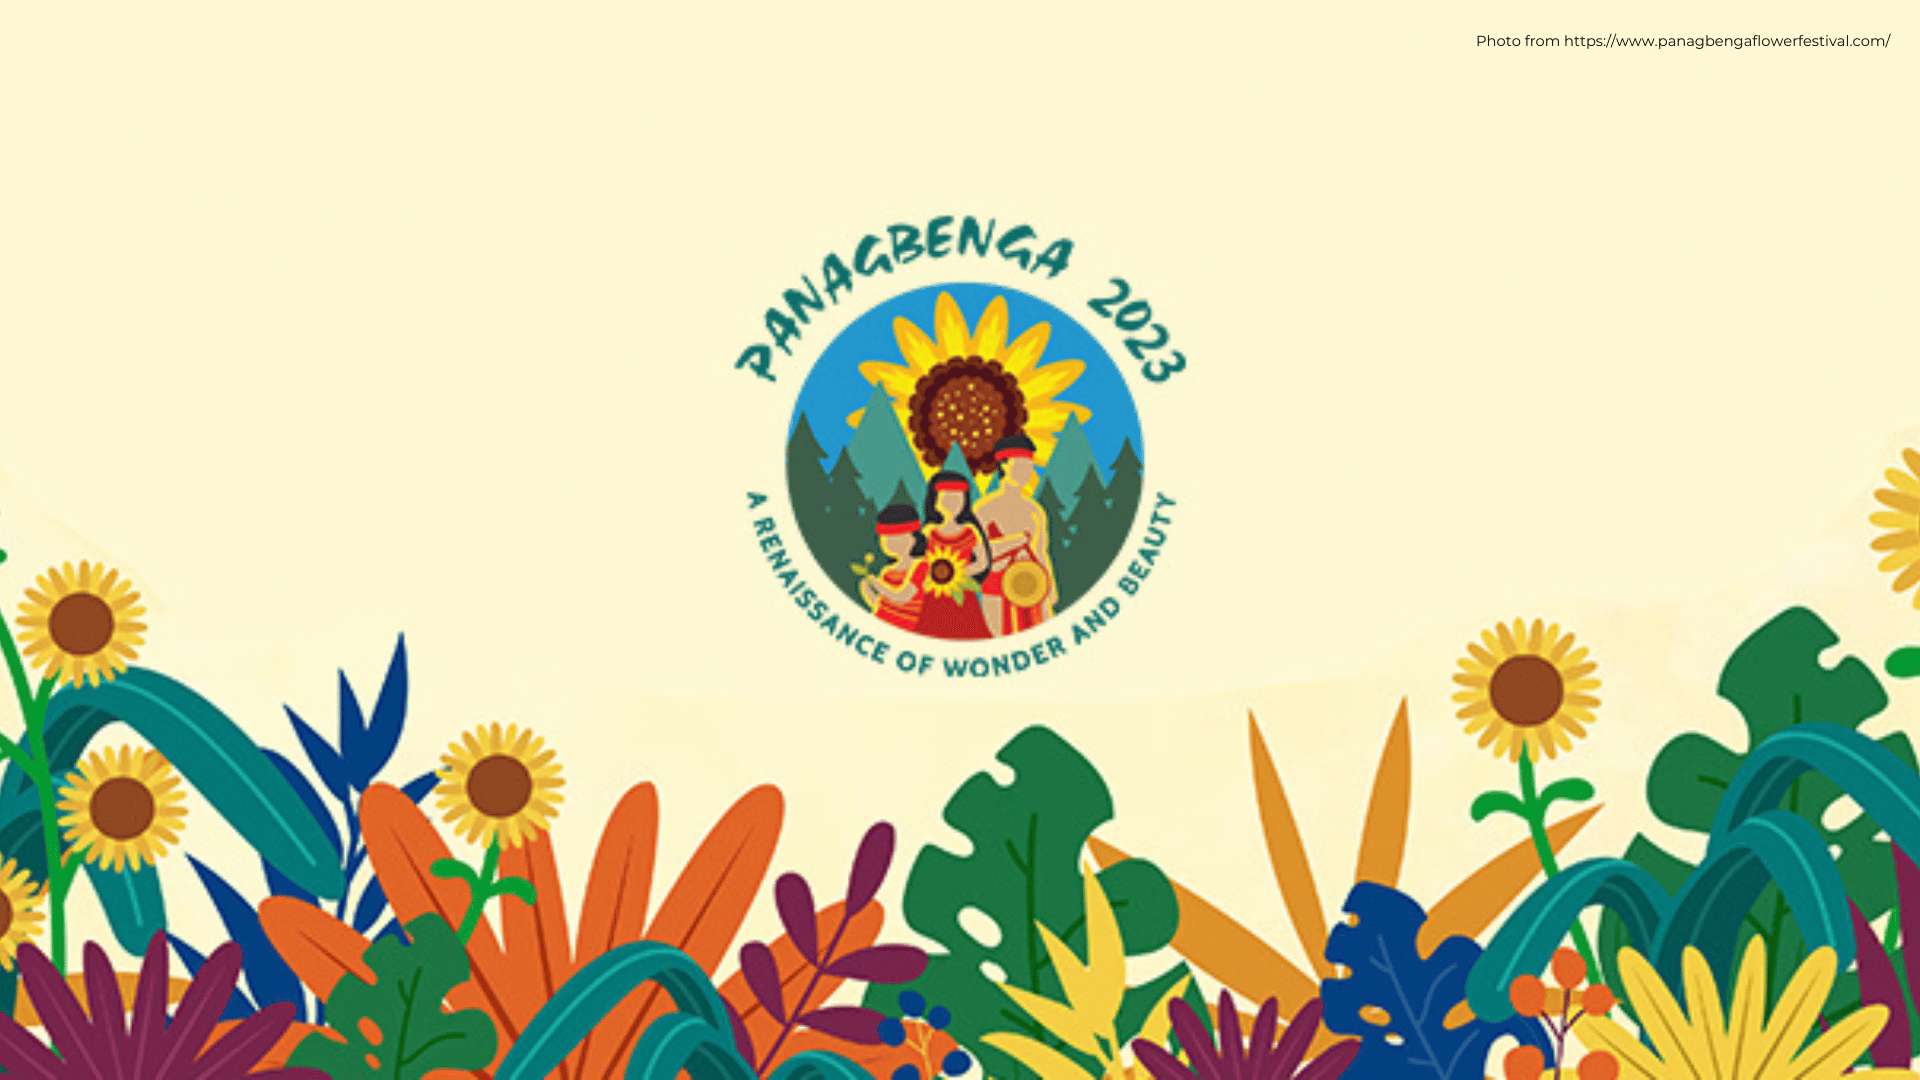 What You Need to Know About Panagbenga Festival 2023